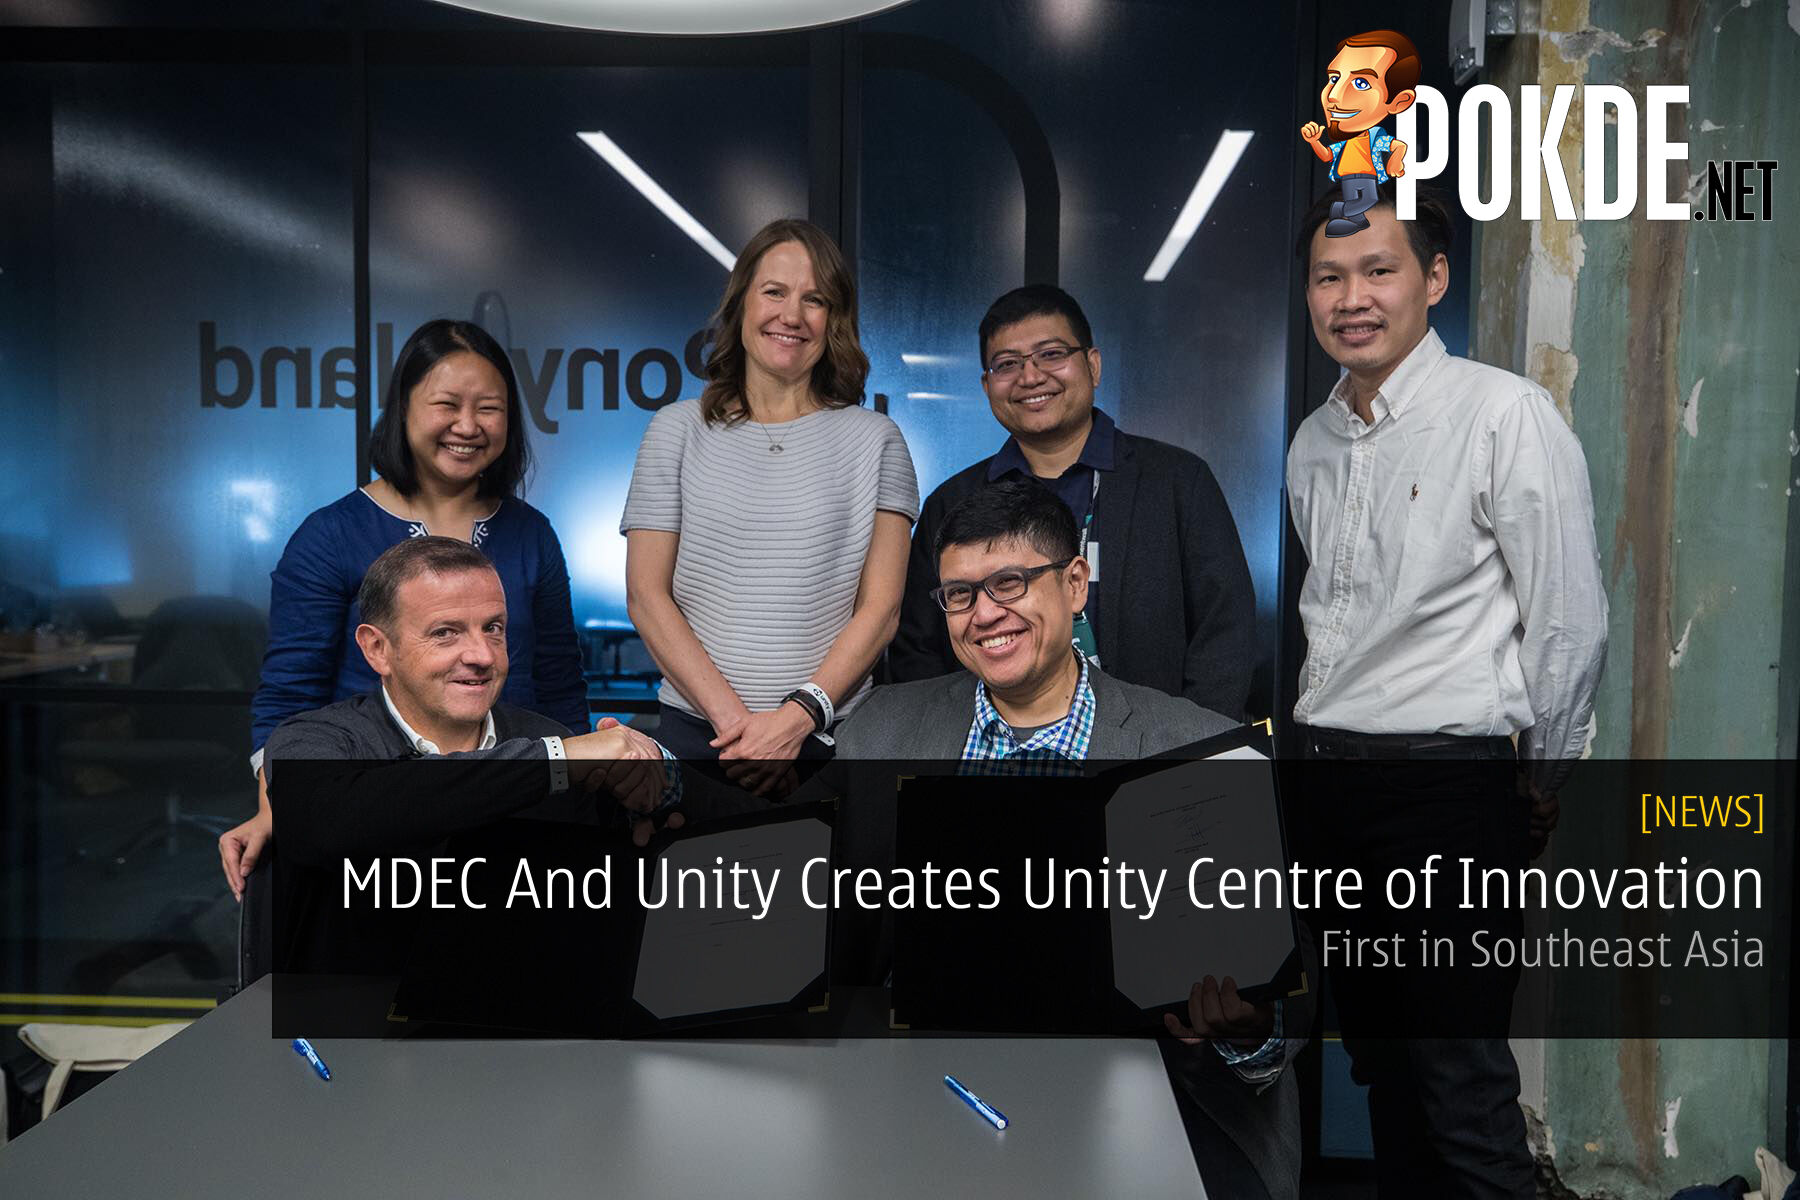 MDEC And Unity Creates Unity Centre of Innovation In Malaysia - First in Southeast Asia 28